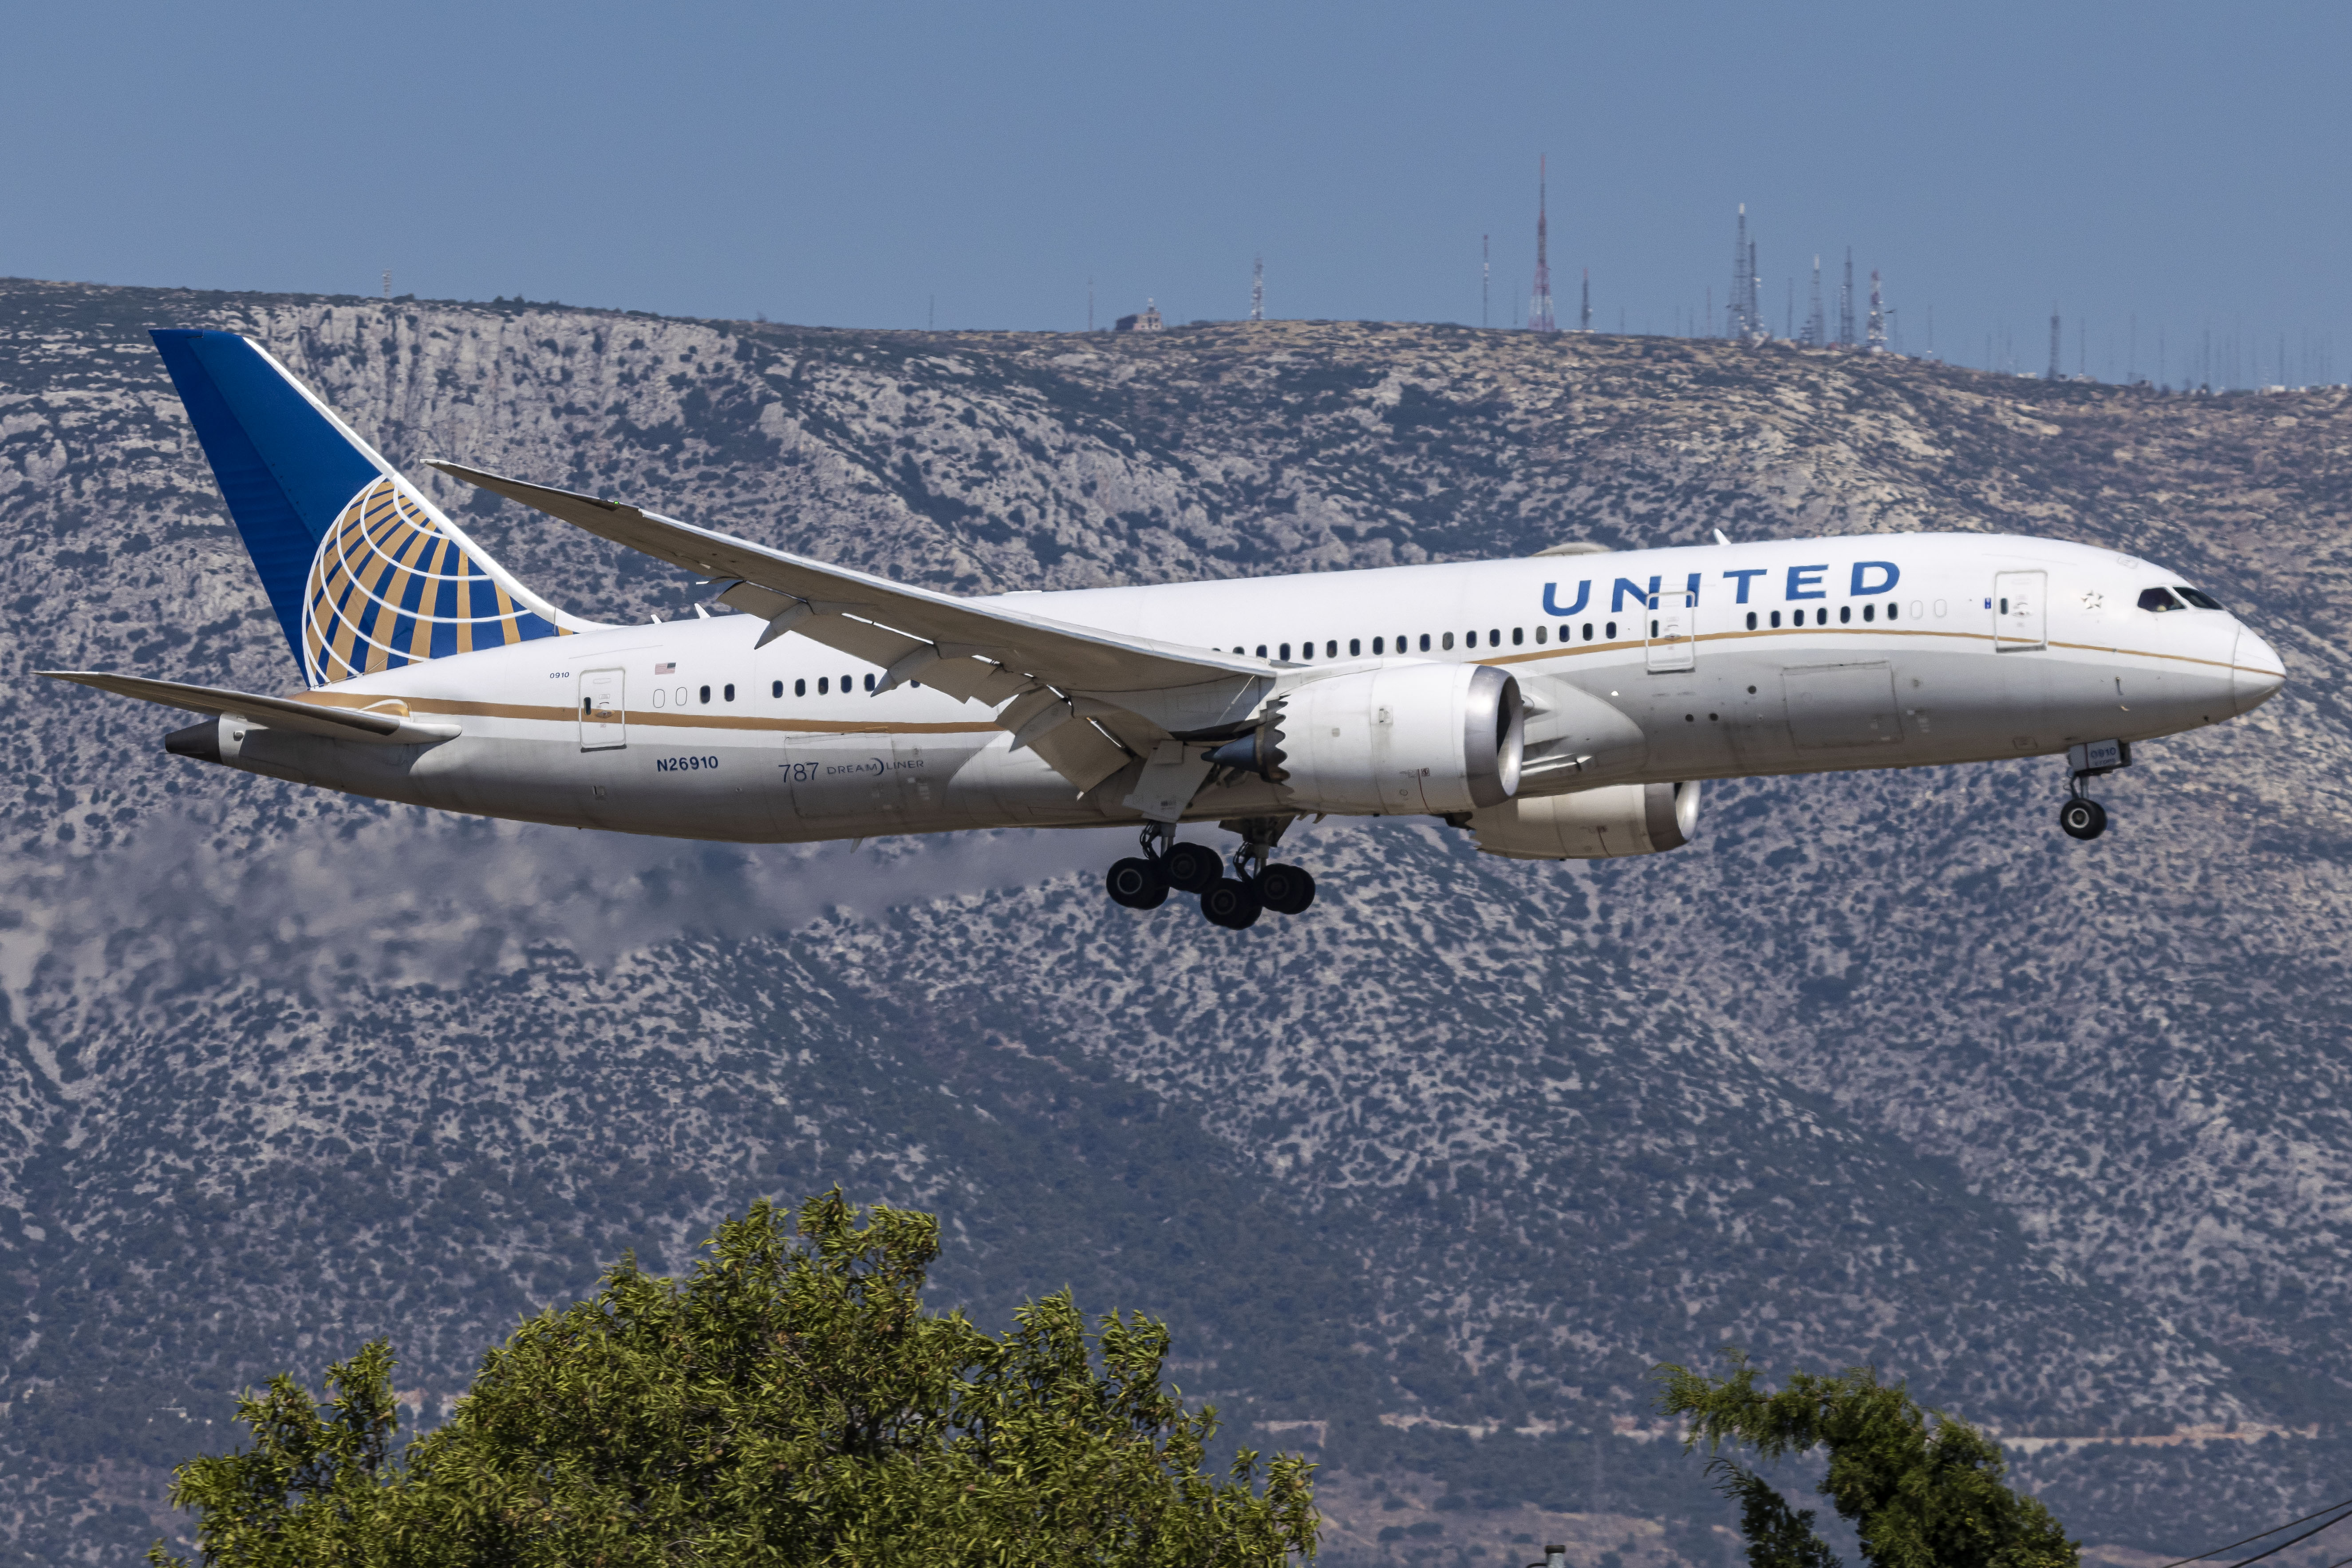 United Airlines Boeing 787 Dreamliner aircraft as seen on final approach flying and landing at Athens International Airport, the Greek capital arriving from Washington Dulles IAD in the United States of America as flight UA982.